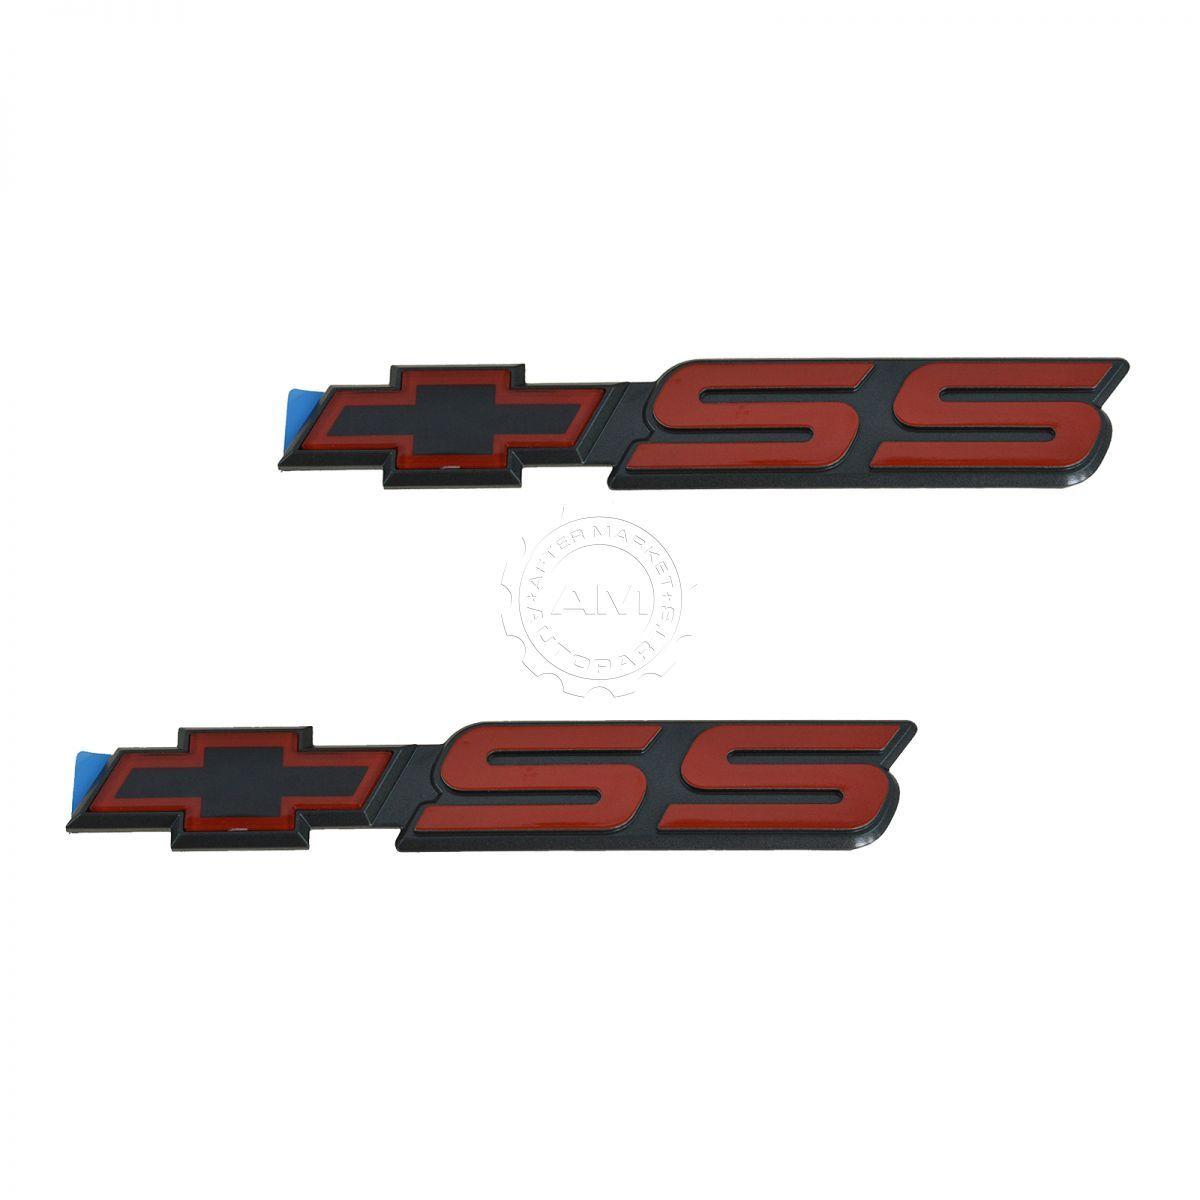 S10 Logo - OEM Emblem Nameplate Red SS Bow Tie Pair Set For 94 04 Chevy S10